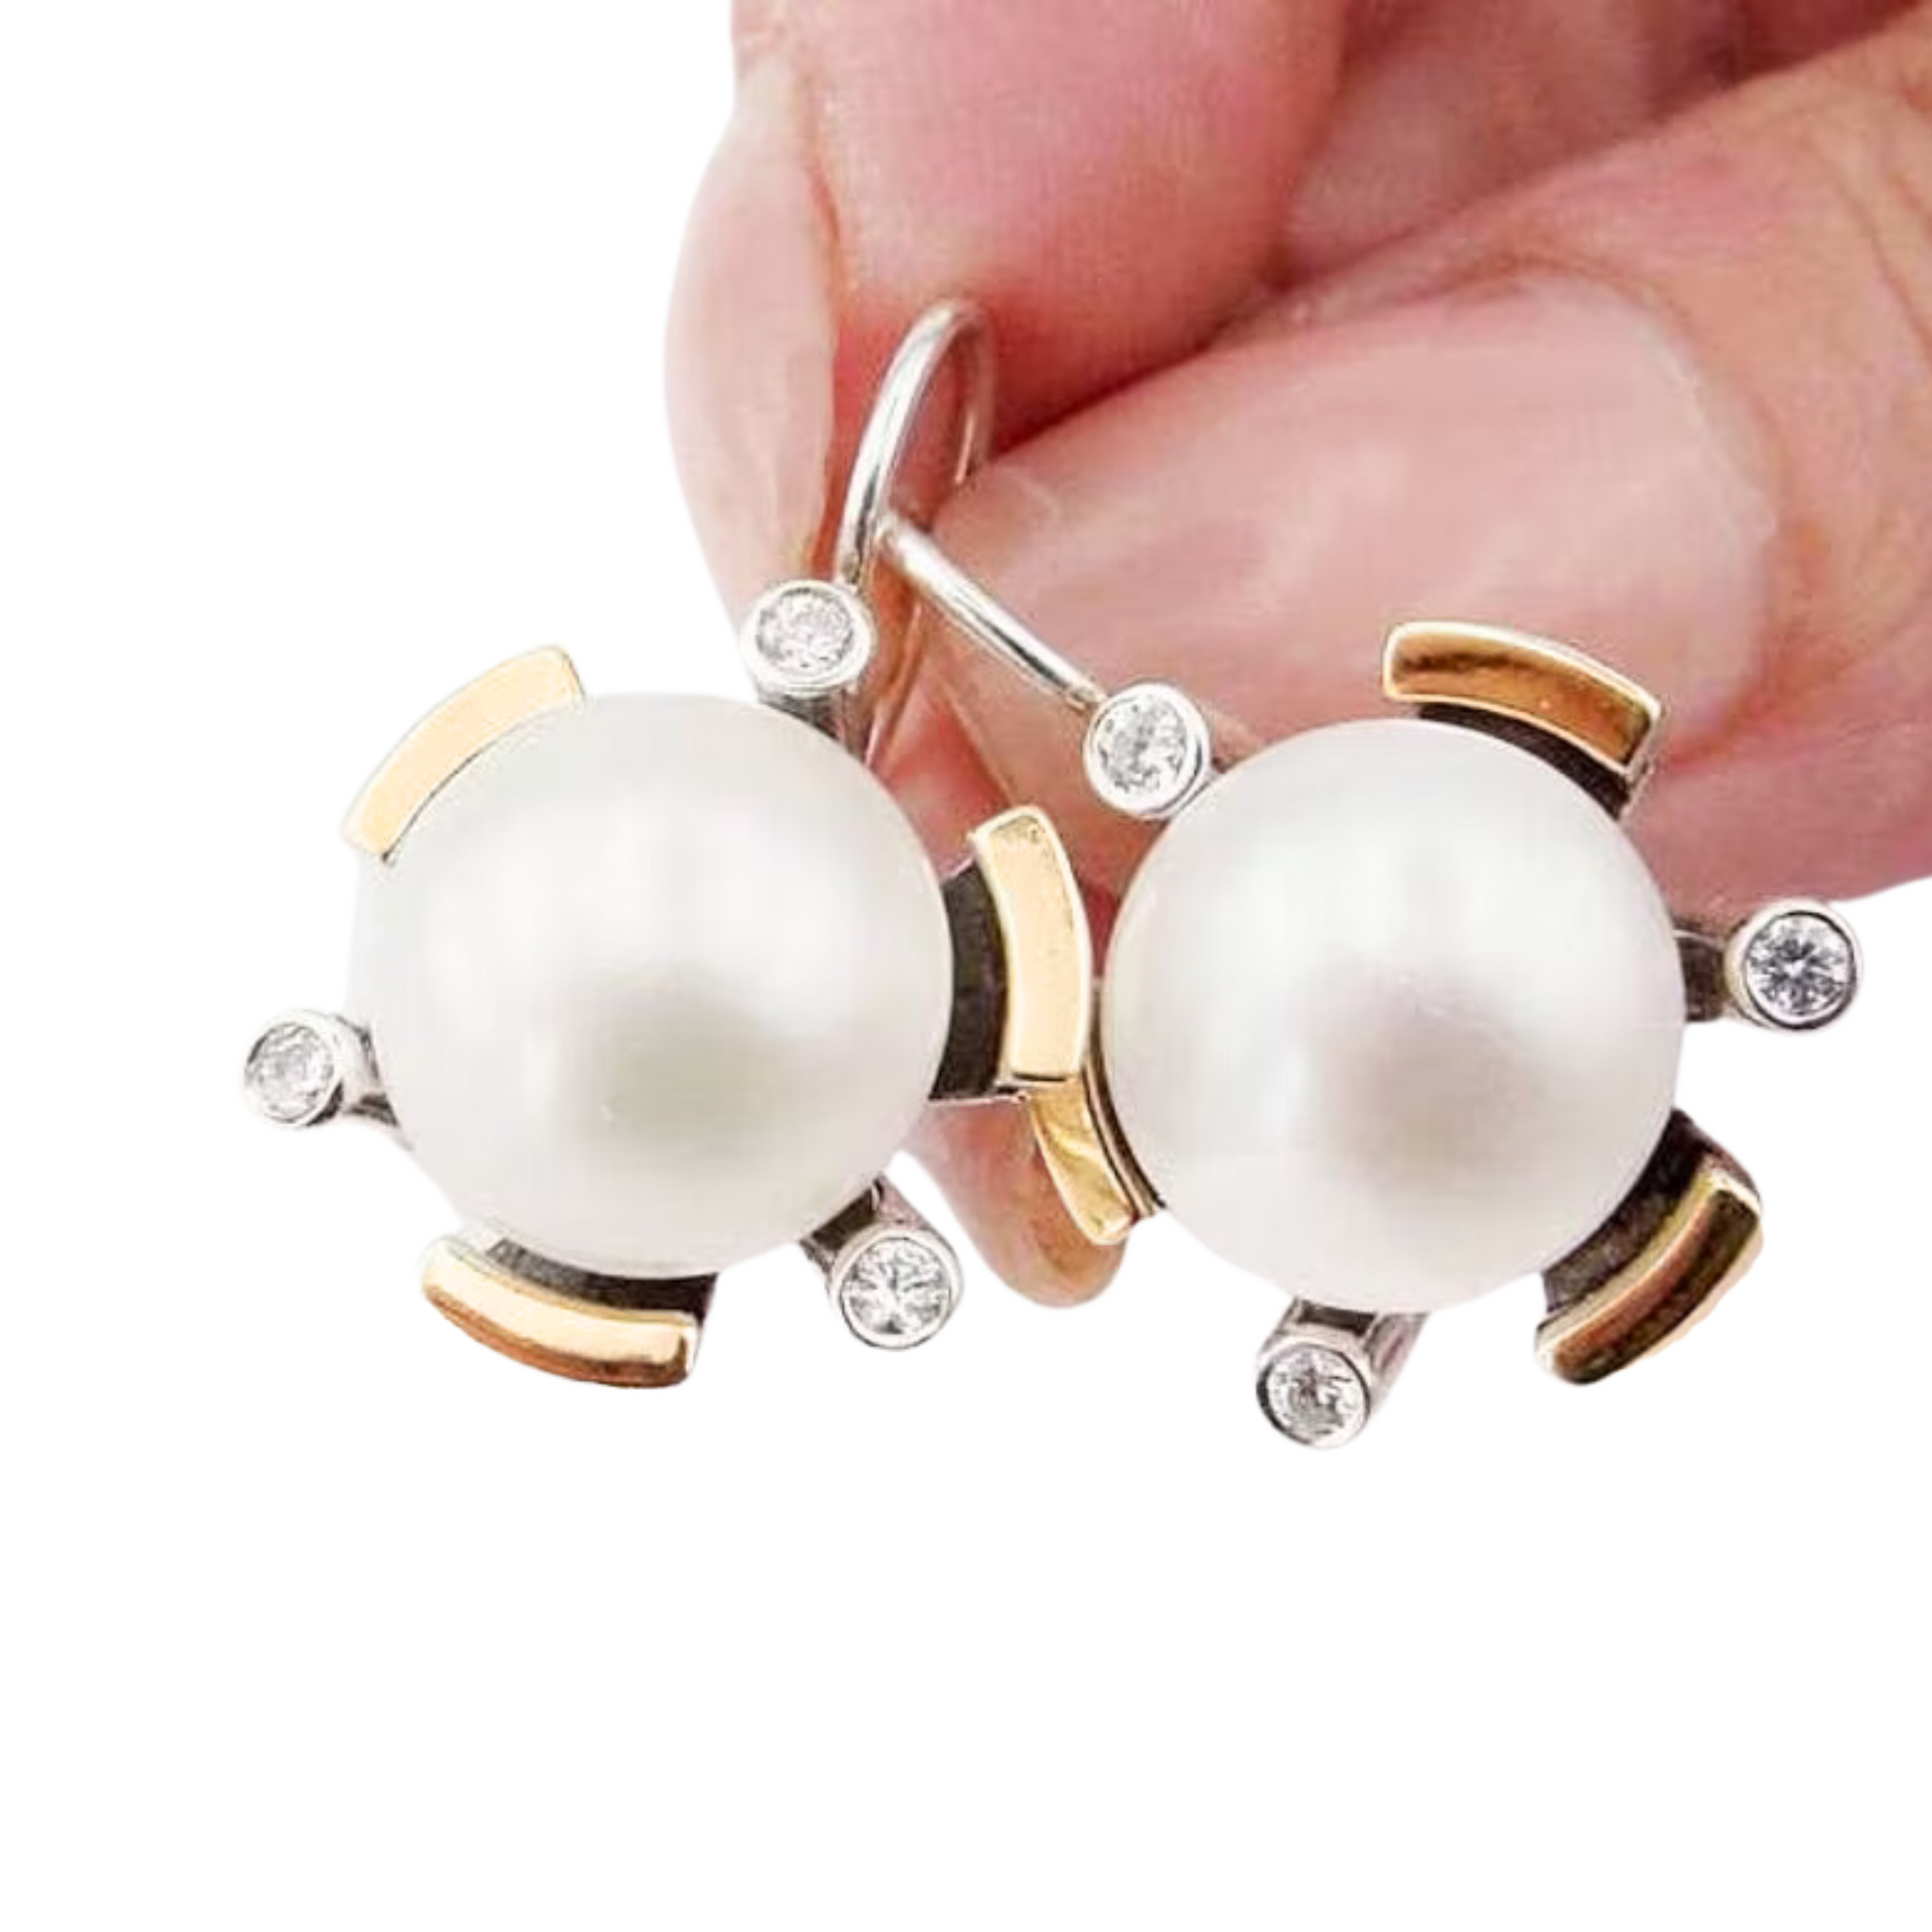 Pearl Earrings, Big Pearl Earrings with Zircon and Gold inlaid in Sterling Silver 